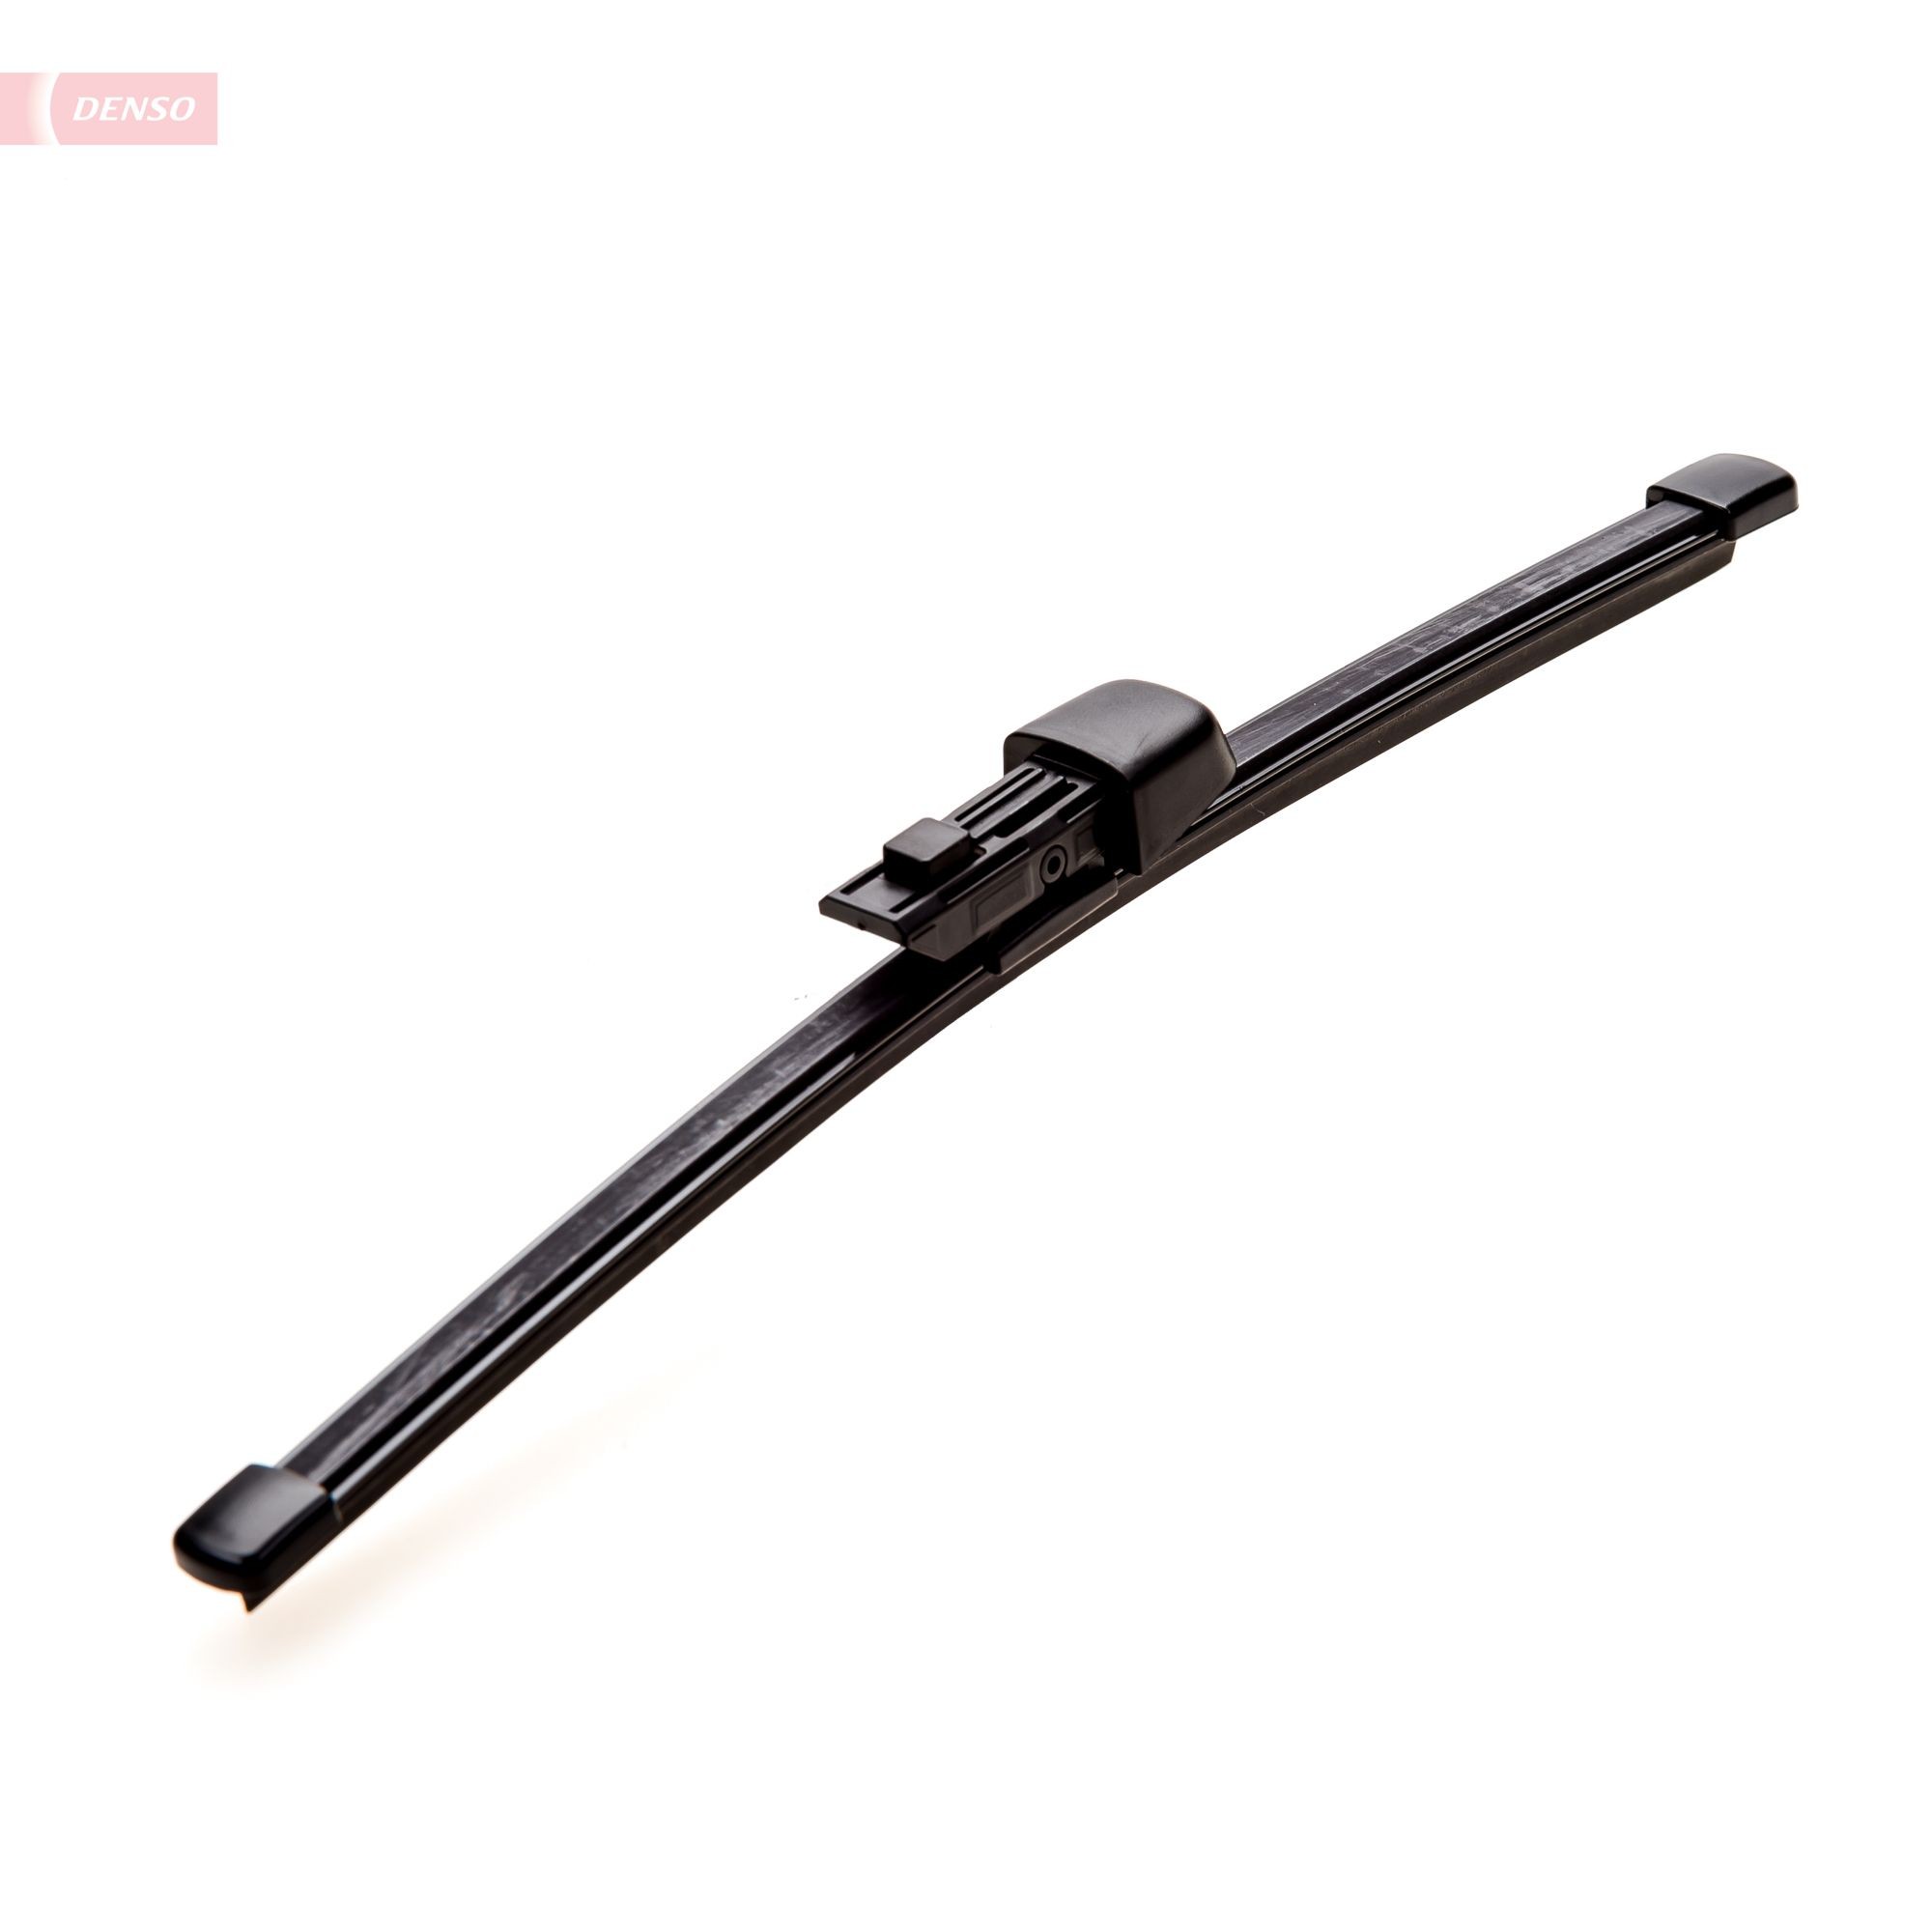 Original DENSO Windscreen wipers DF-313 for VW UP